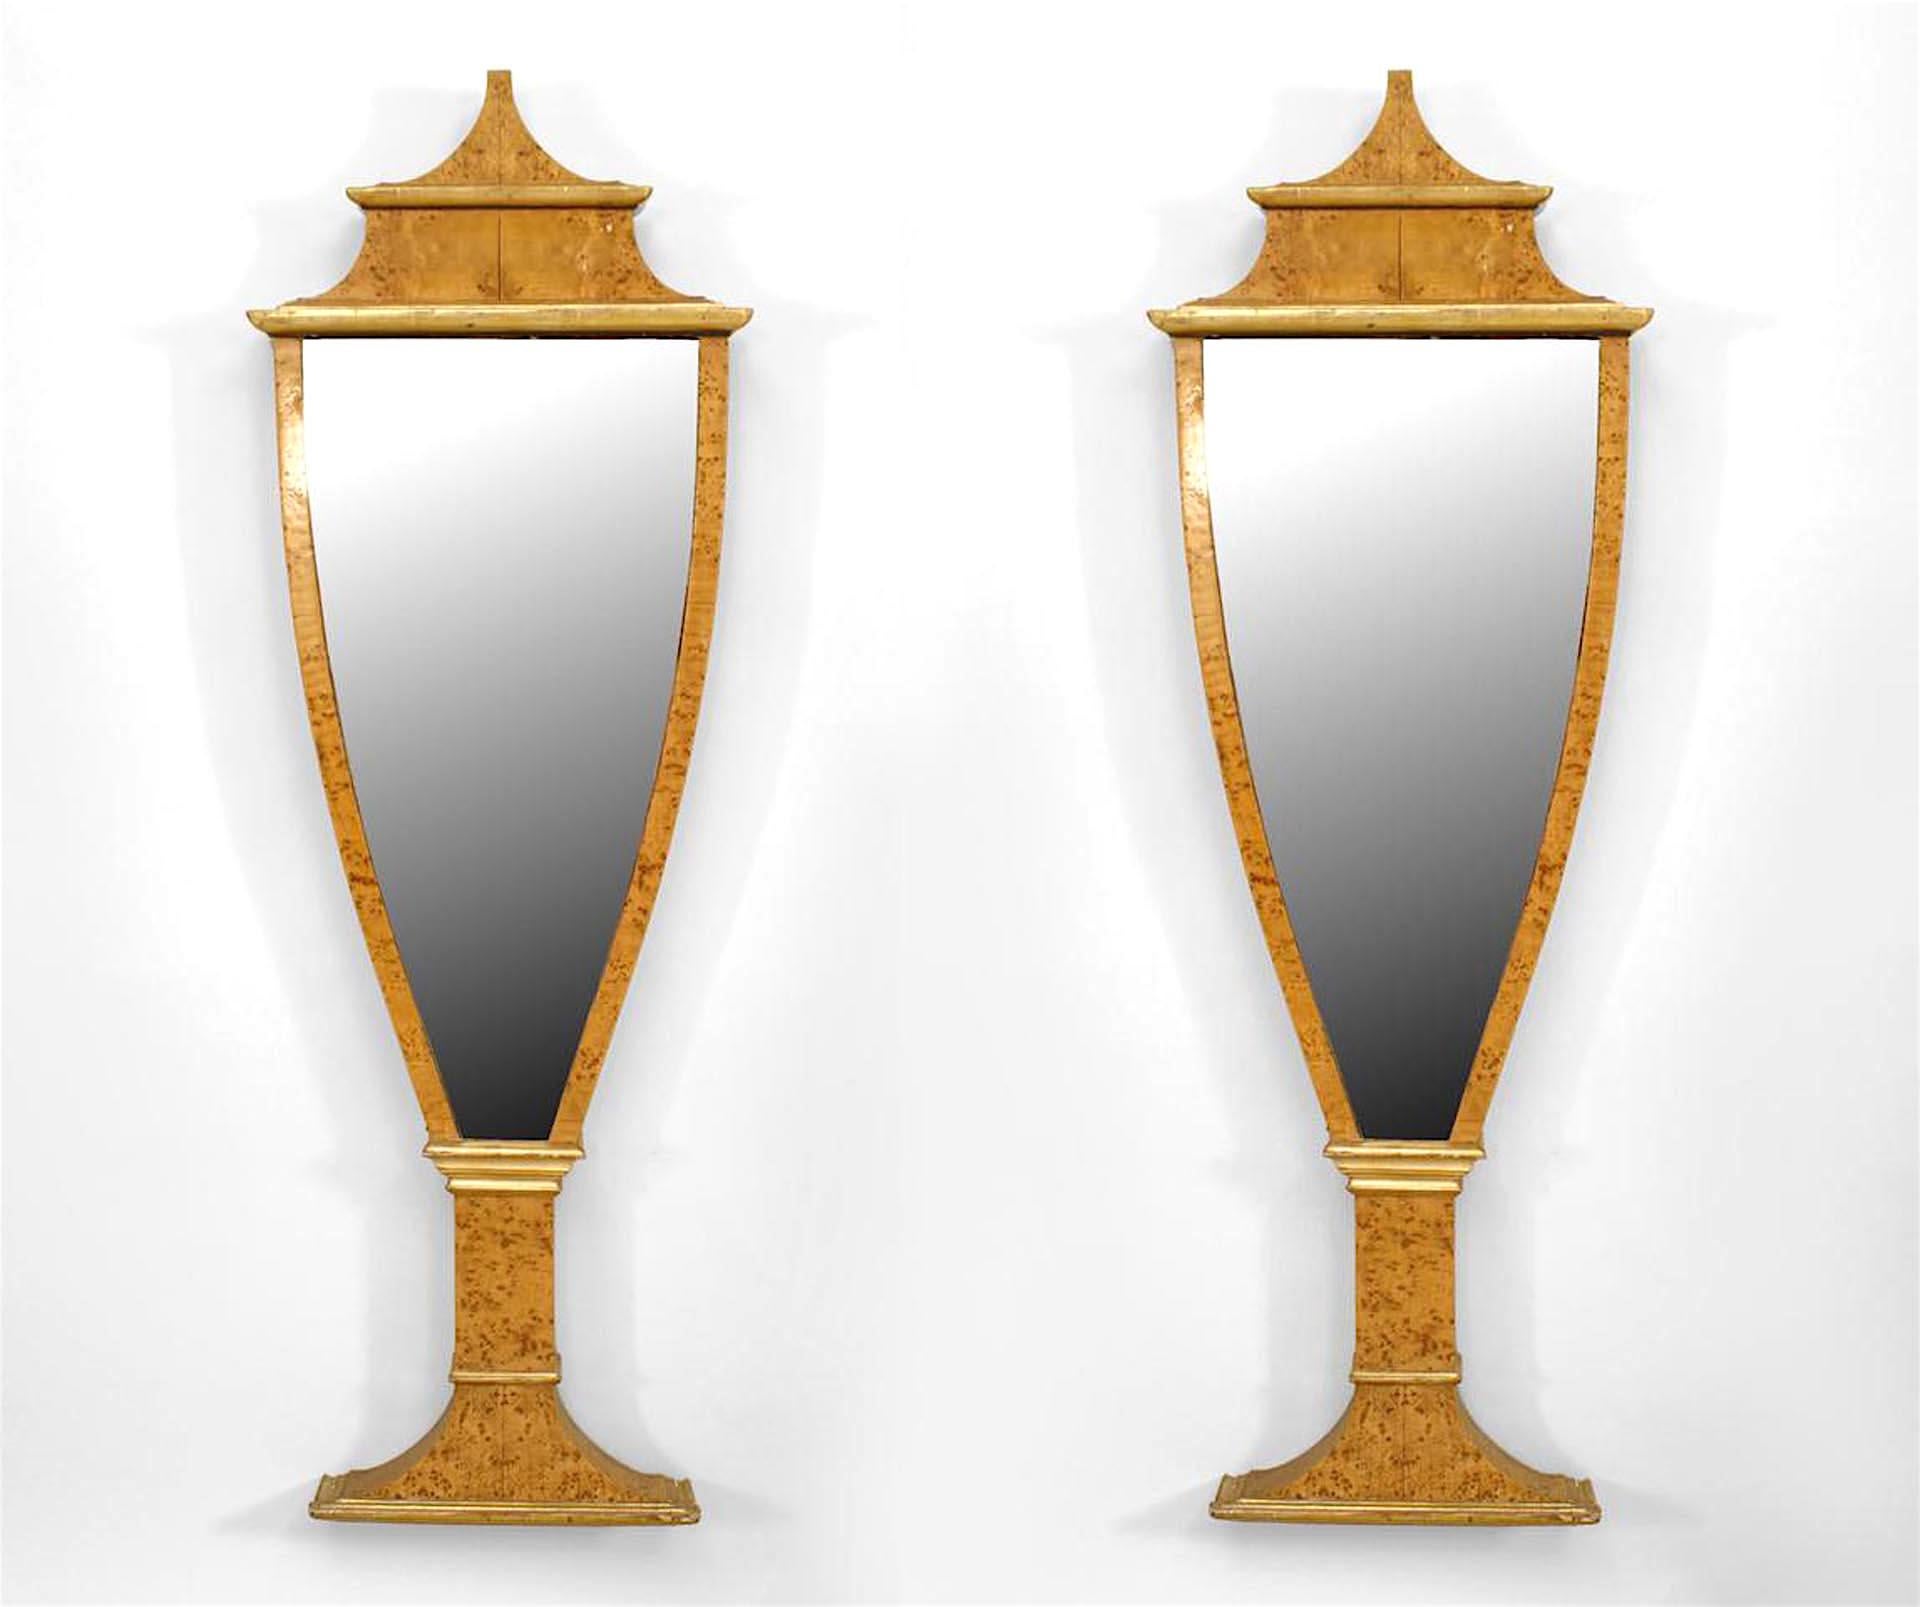 Pair of Italian Neoclassic-style (1930s) karelian birch and gilt trim wall mirrors with elongated urn shape design. (PRICED AS Pair)
